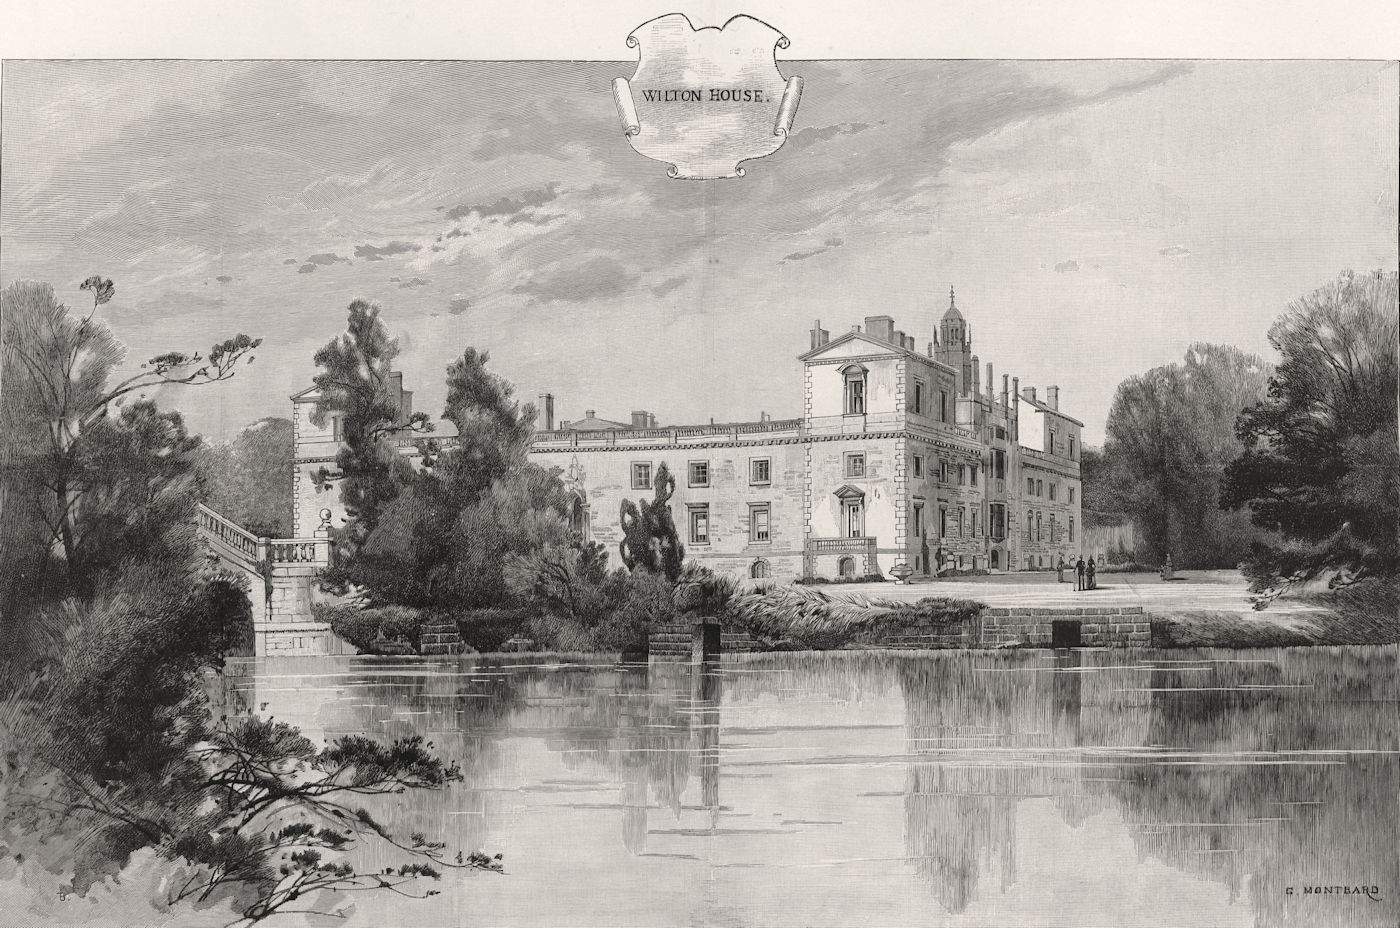 Associate Product Wilton House: The seat of the Earl of Pembroke. Wiltshire. Historic Houses 1887